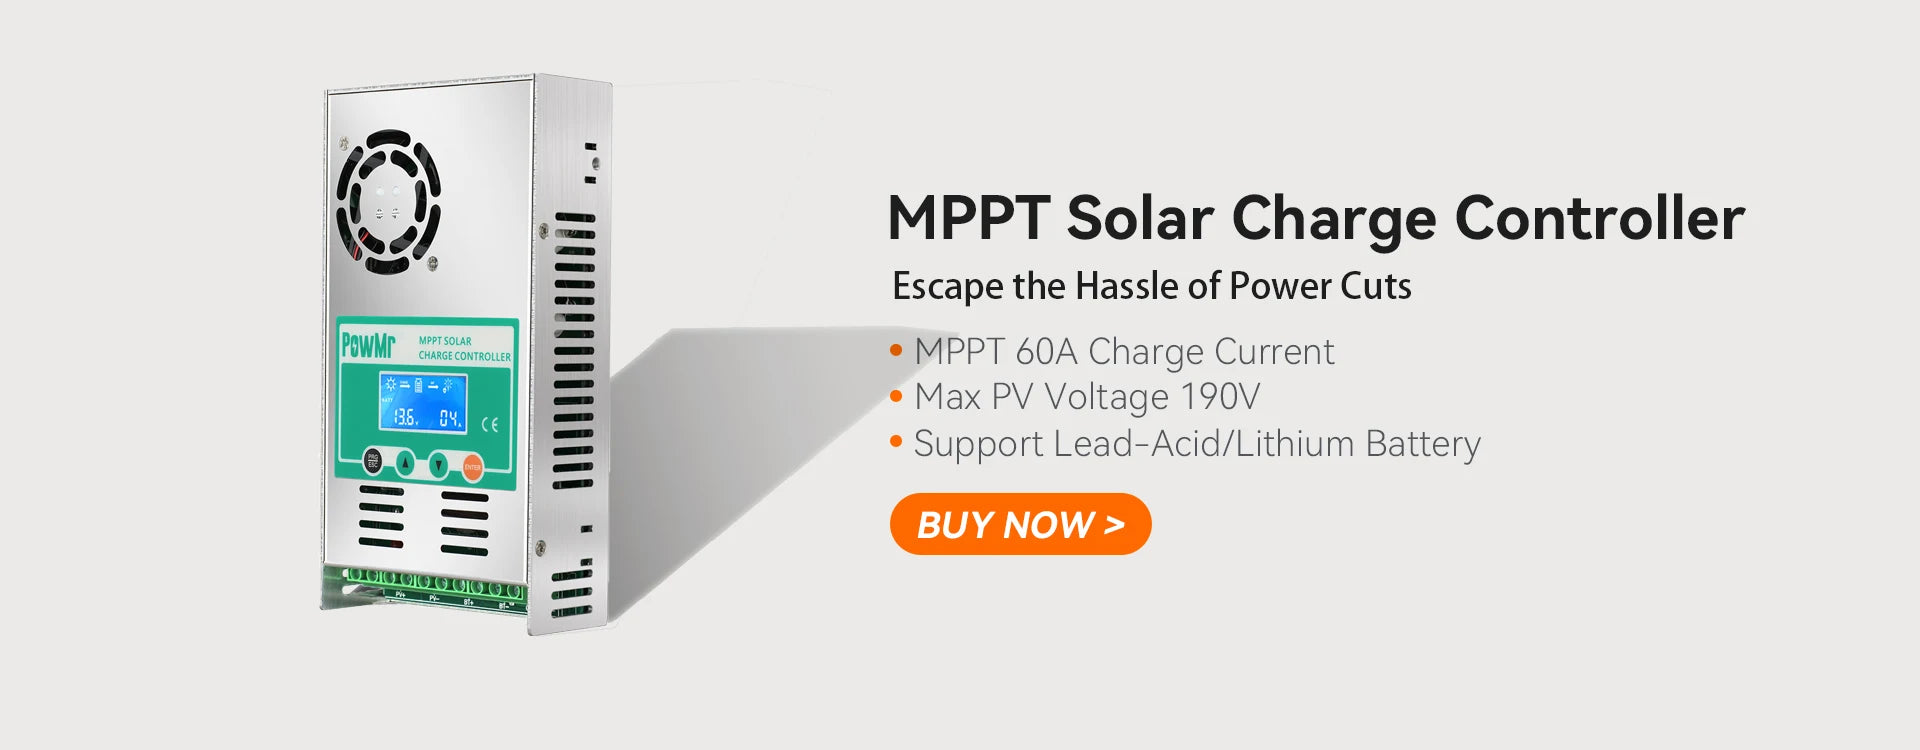 PowMr Solar Charge Controller, Solar Charge Controller with MPPT tech for lead-acid and lithium batteries, 60A charge current, 190V PV voltage.